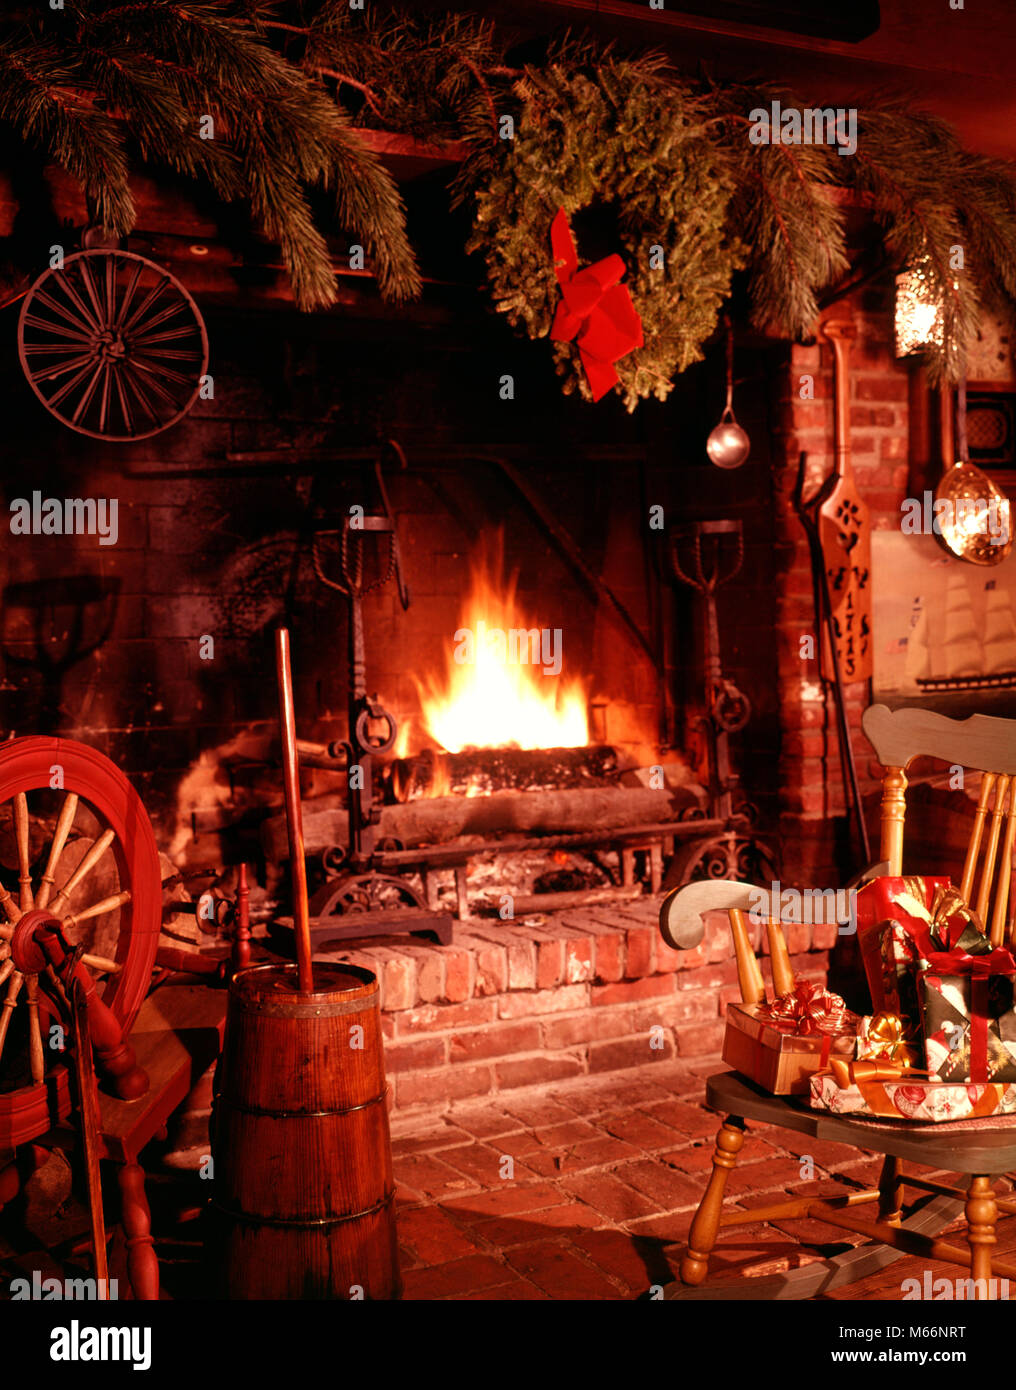 1960s COLONIAL STYLE FIREPLACE FIRE BLAZING DECORATED CHRISTMAS WREATH CHAIR WITH PRESENTS AND GIFTS - kx4923 HAR001 HARS OLD FASHIONED Stock Photo